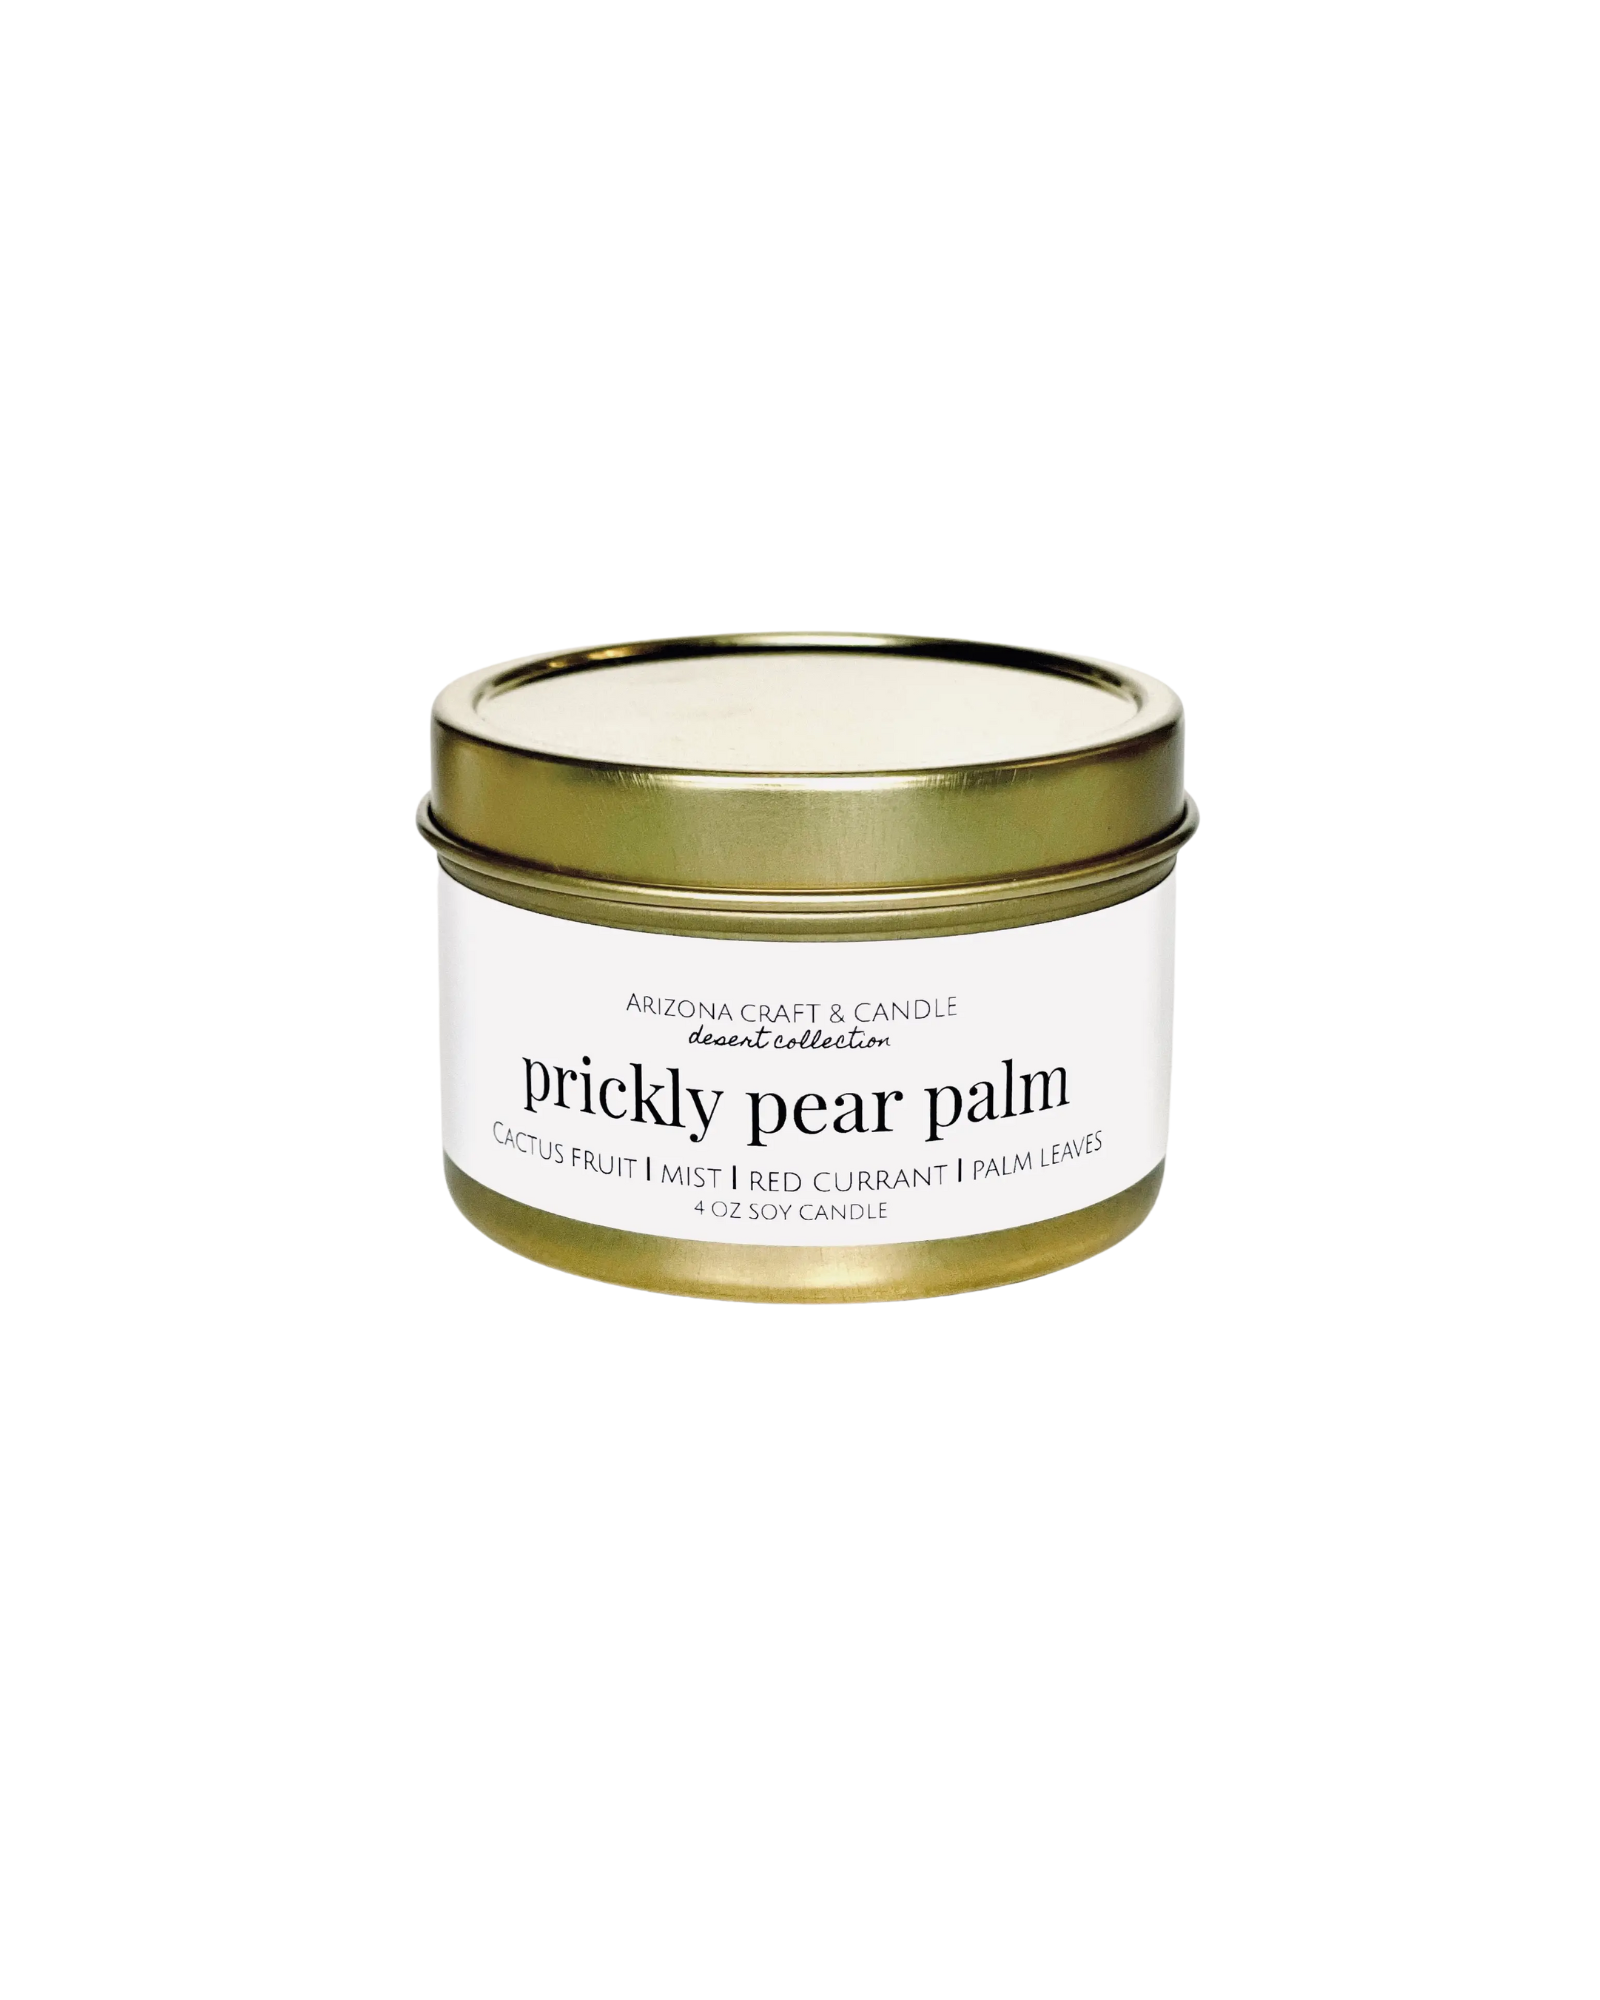 Prickly pear palm gold travel candle with a white label